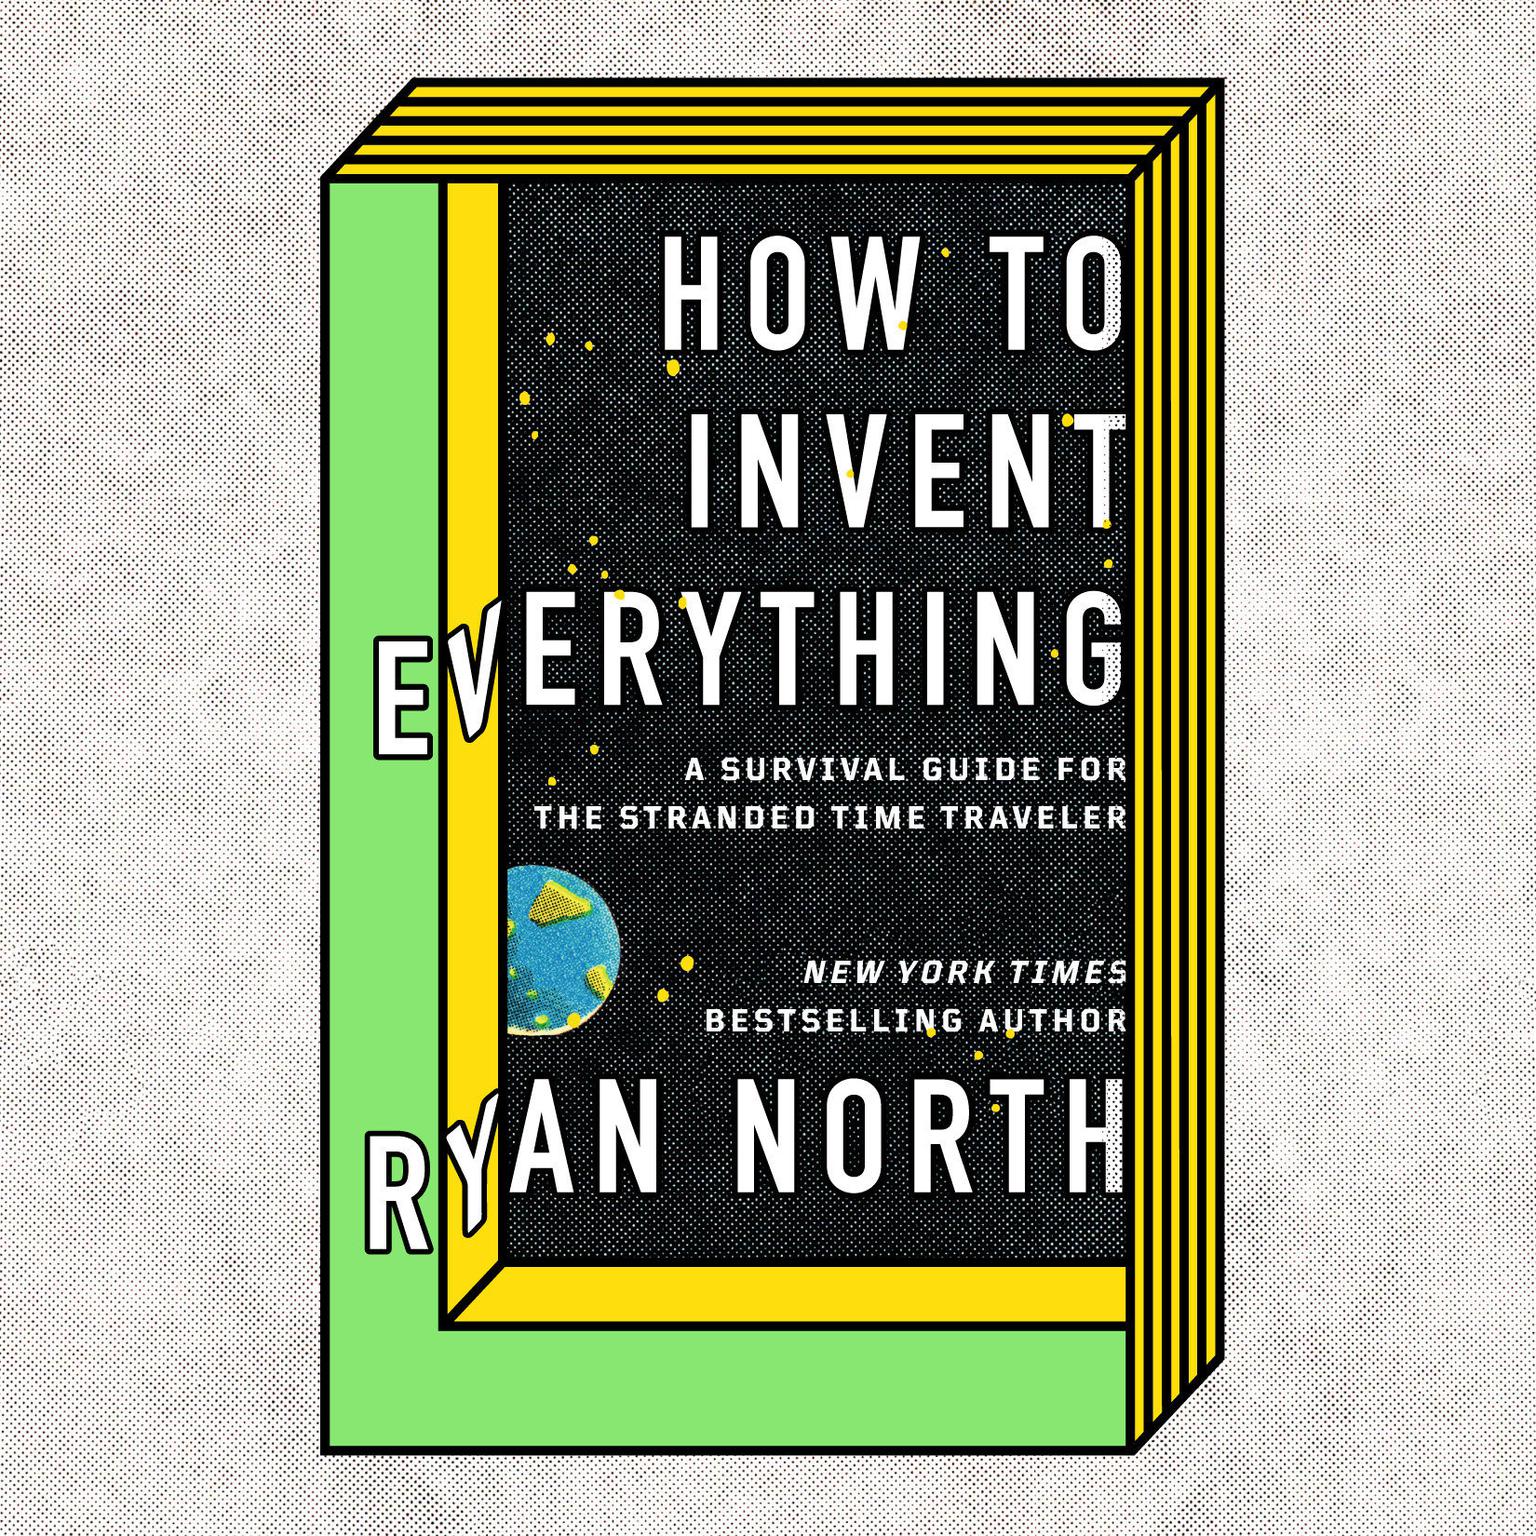 How to Invent Everything: A Survival Guide for the Stranded Time Traveler Audiobook, by Ryan North